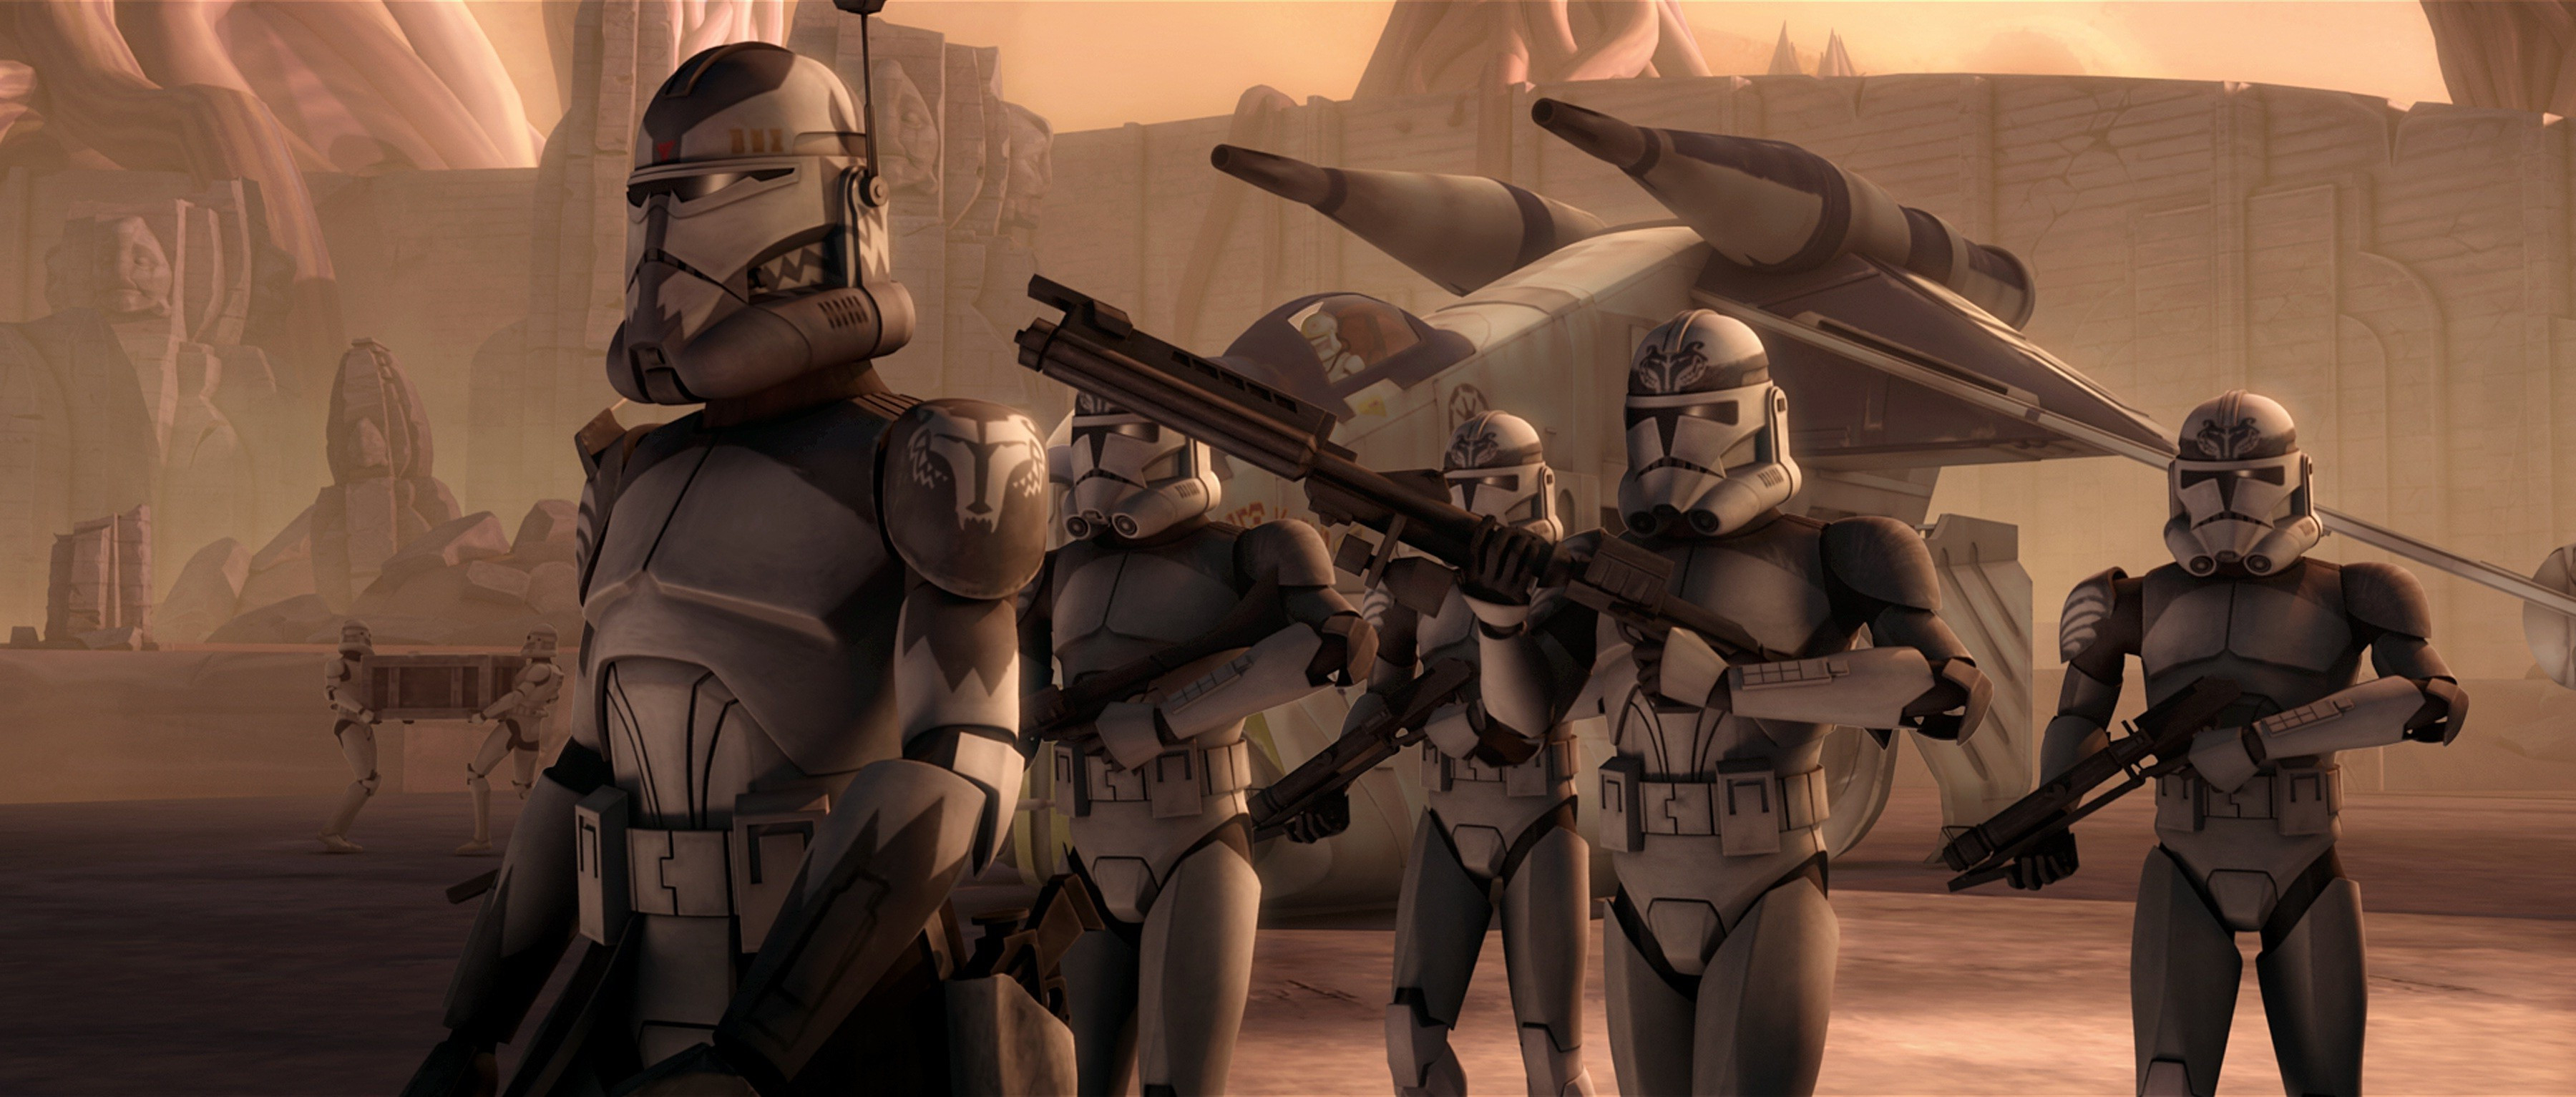 3600x1533 Clone Trooper Phase 2 Wallpapers